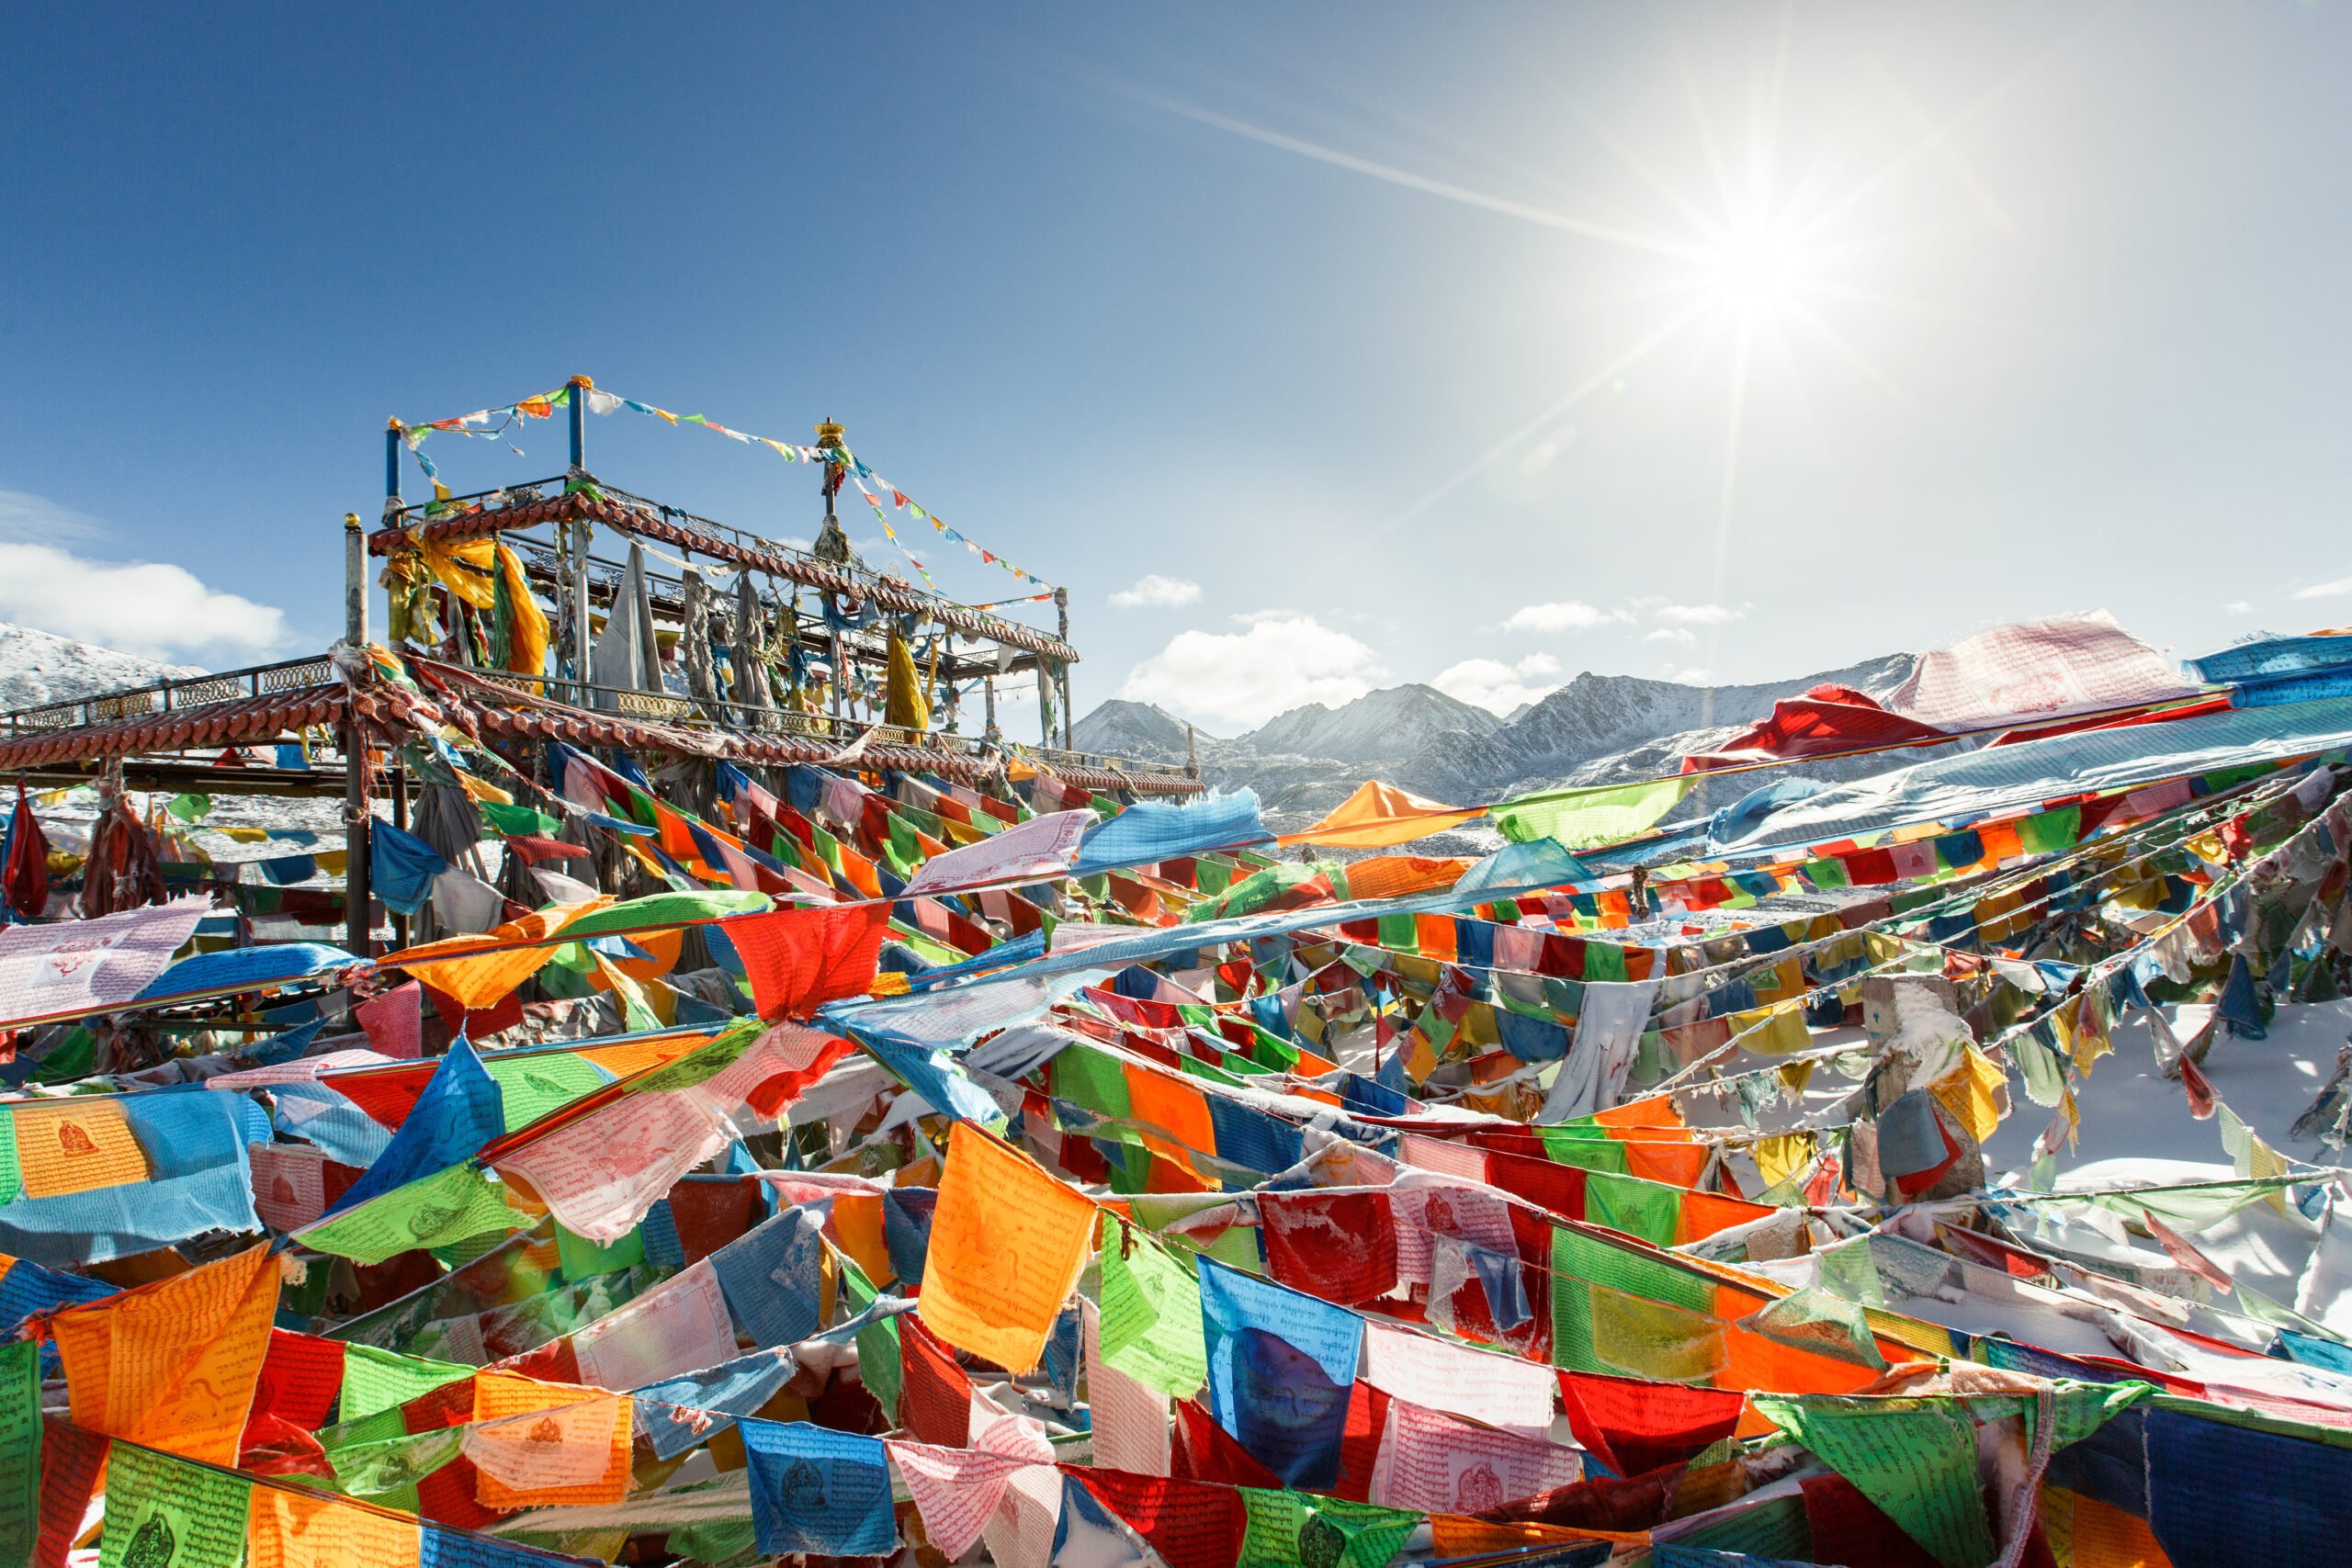 Discover The Amazing Nature Of Tibet In Our 8 Day Of Classic Tibet Tour